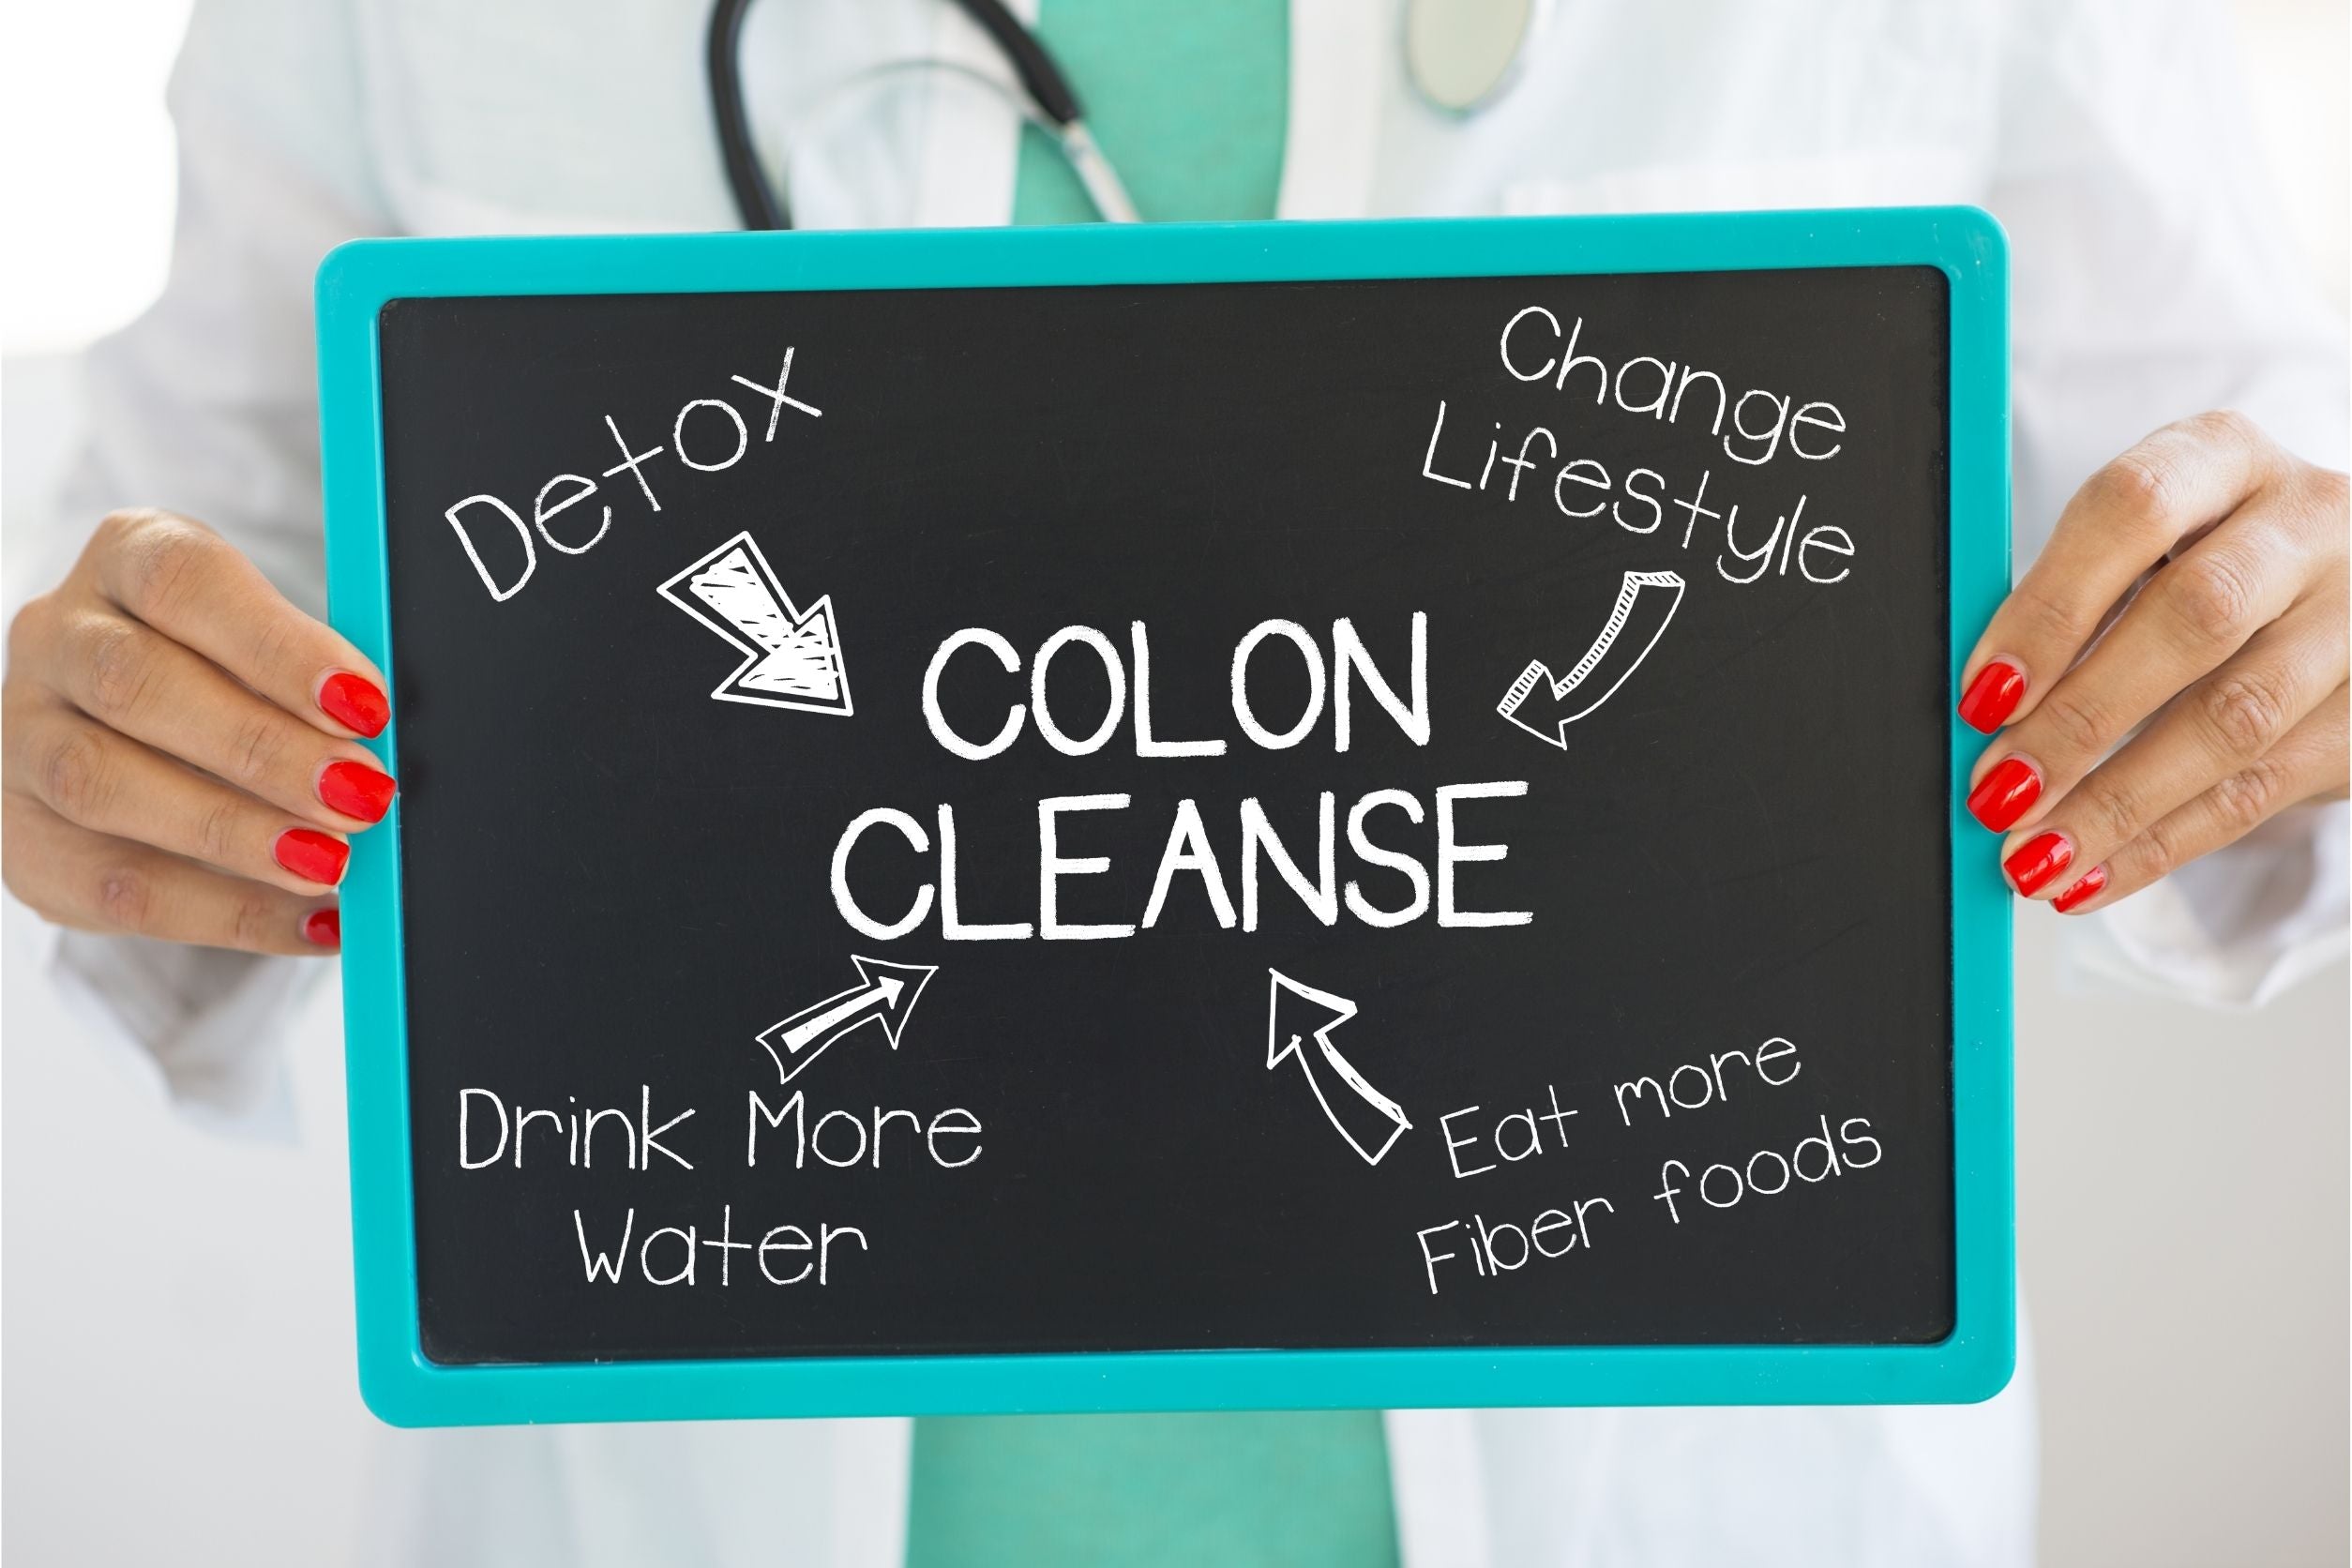 3 Benefits of Doing a Natural Colon Cleanse